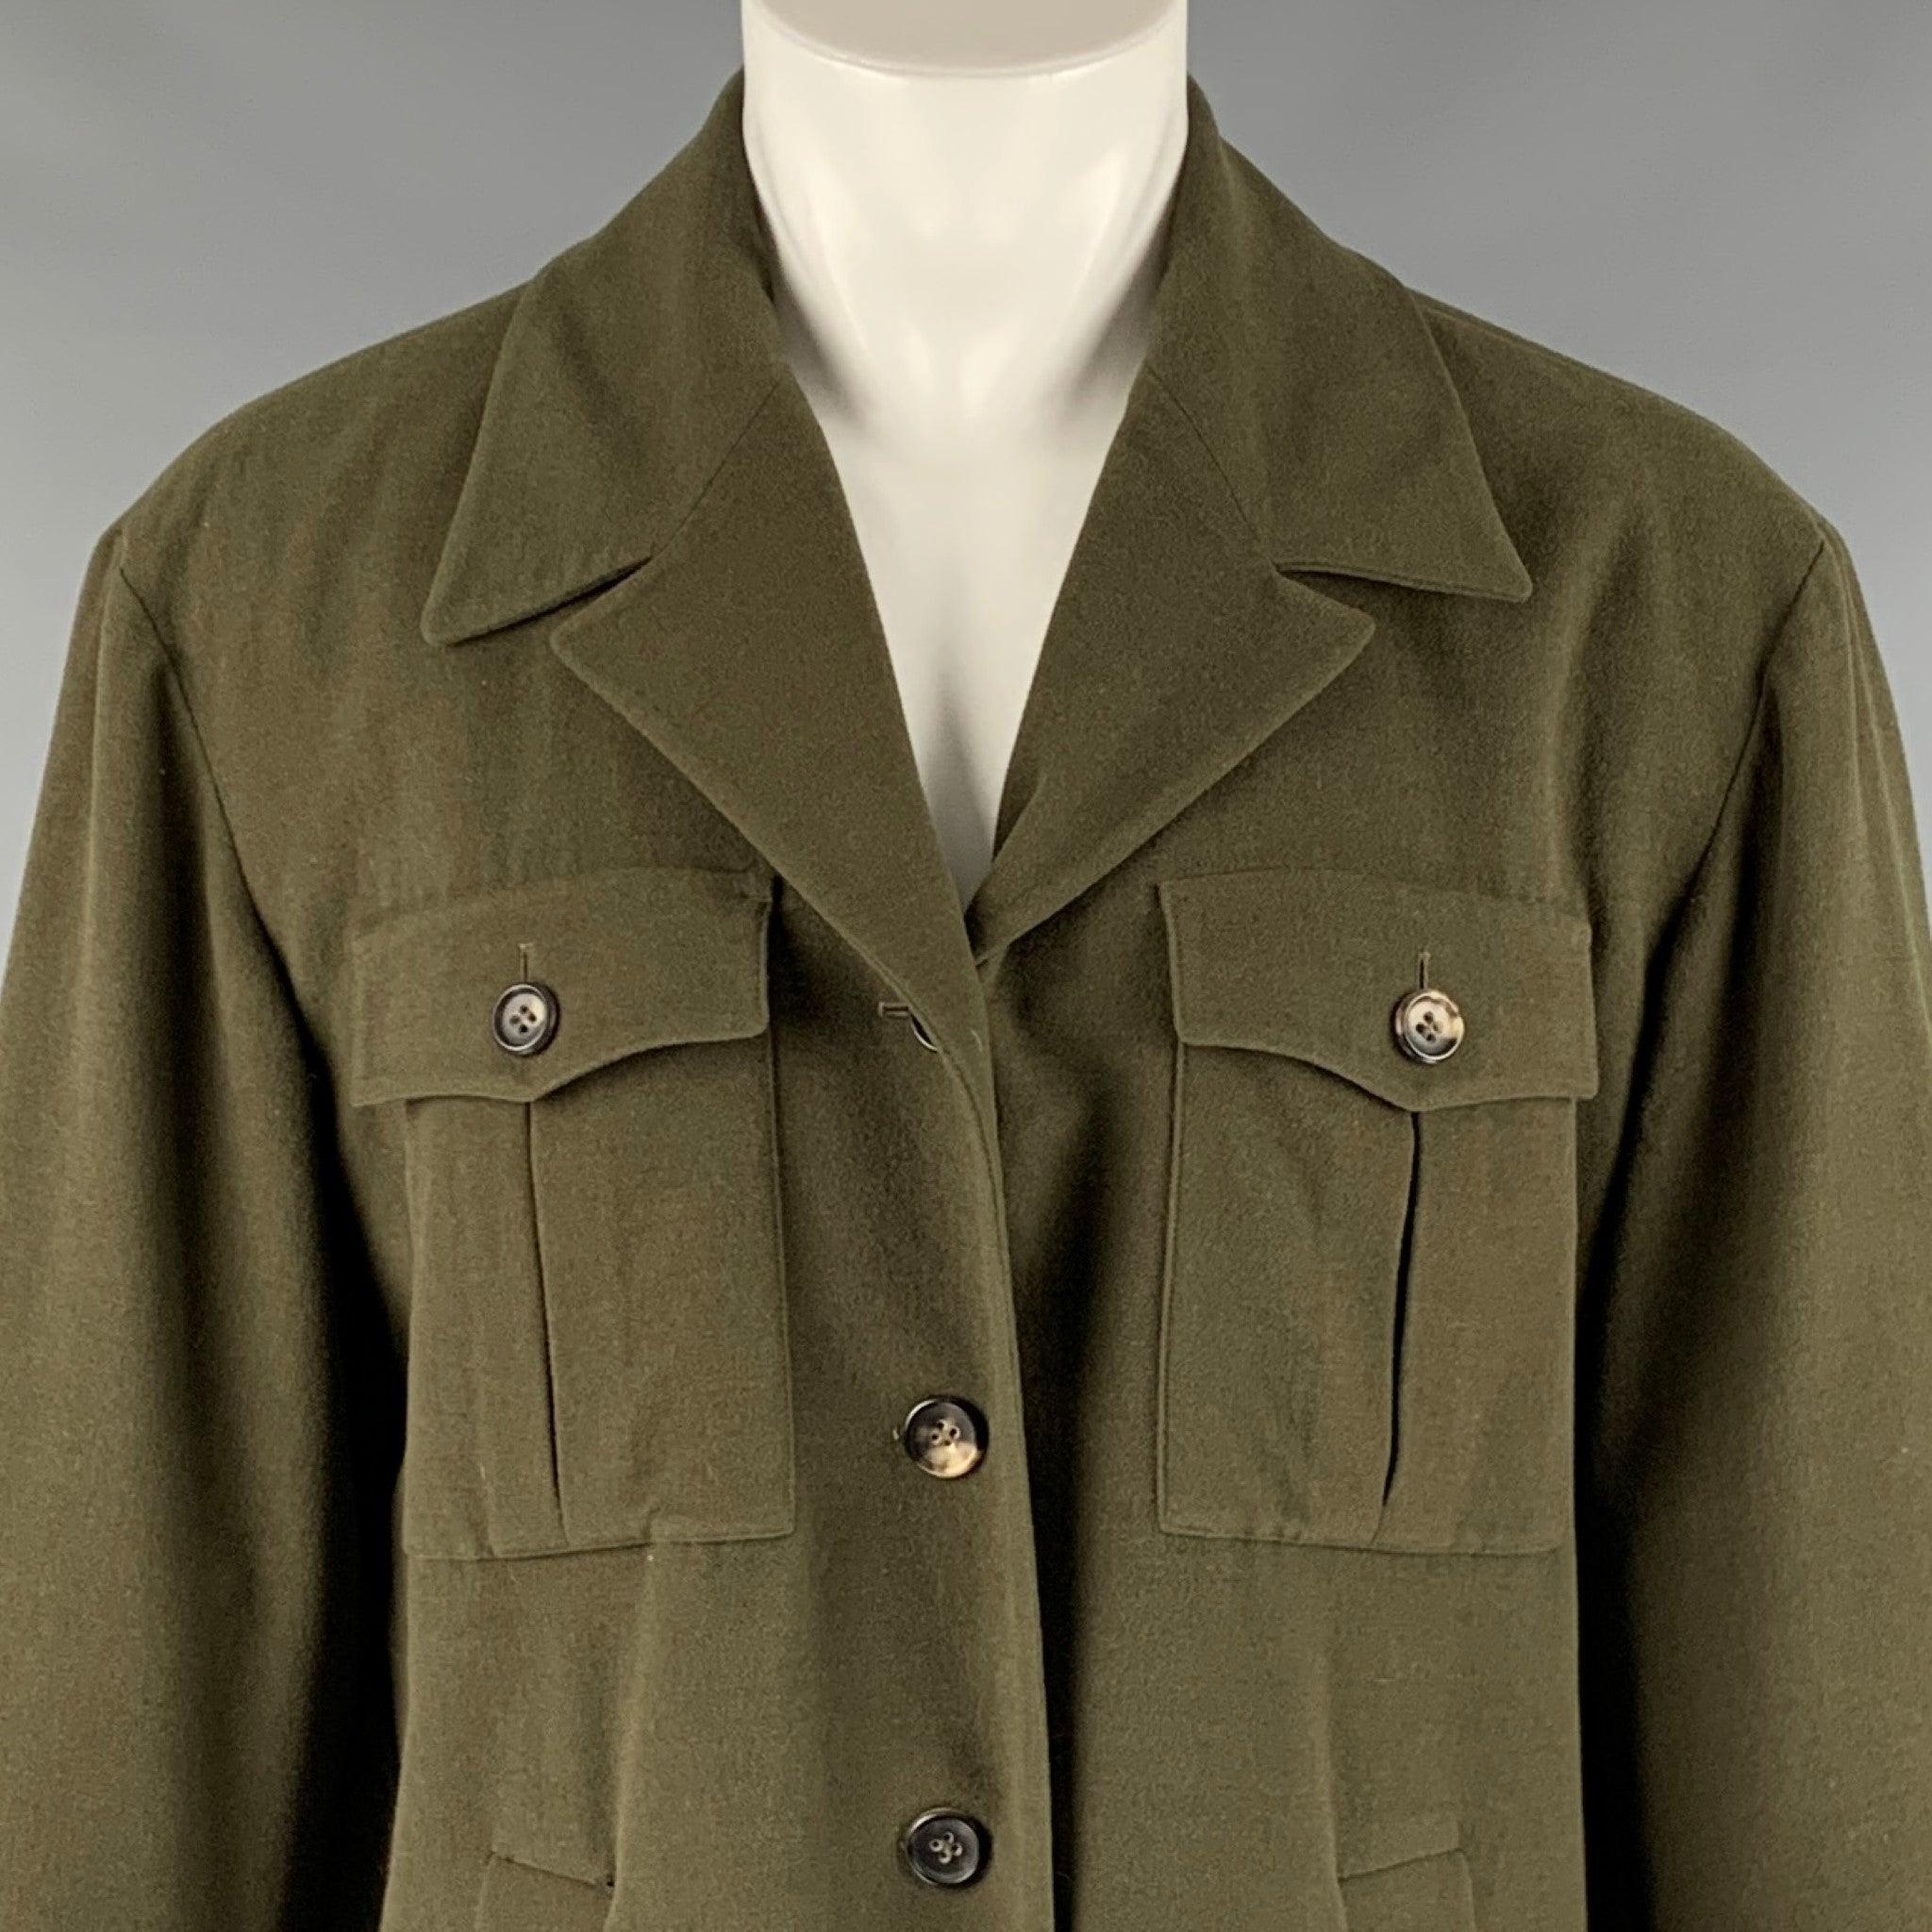 JIL SANDER coat
in an olive green lambswool angora blend fabric featuring a notch lapel, four large pockets, and a button closure.Excellent Pre-Owned Condition. 

Marked:   38 

Measurements: 
 
Shoulder: 20 inches Chest: 38 inches Sleeve: 21 inches